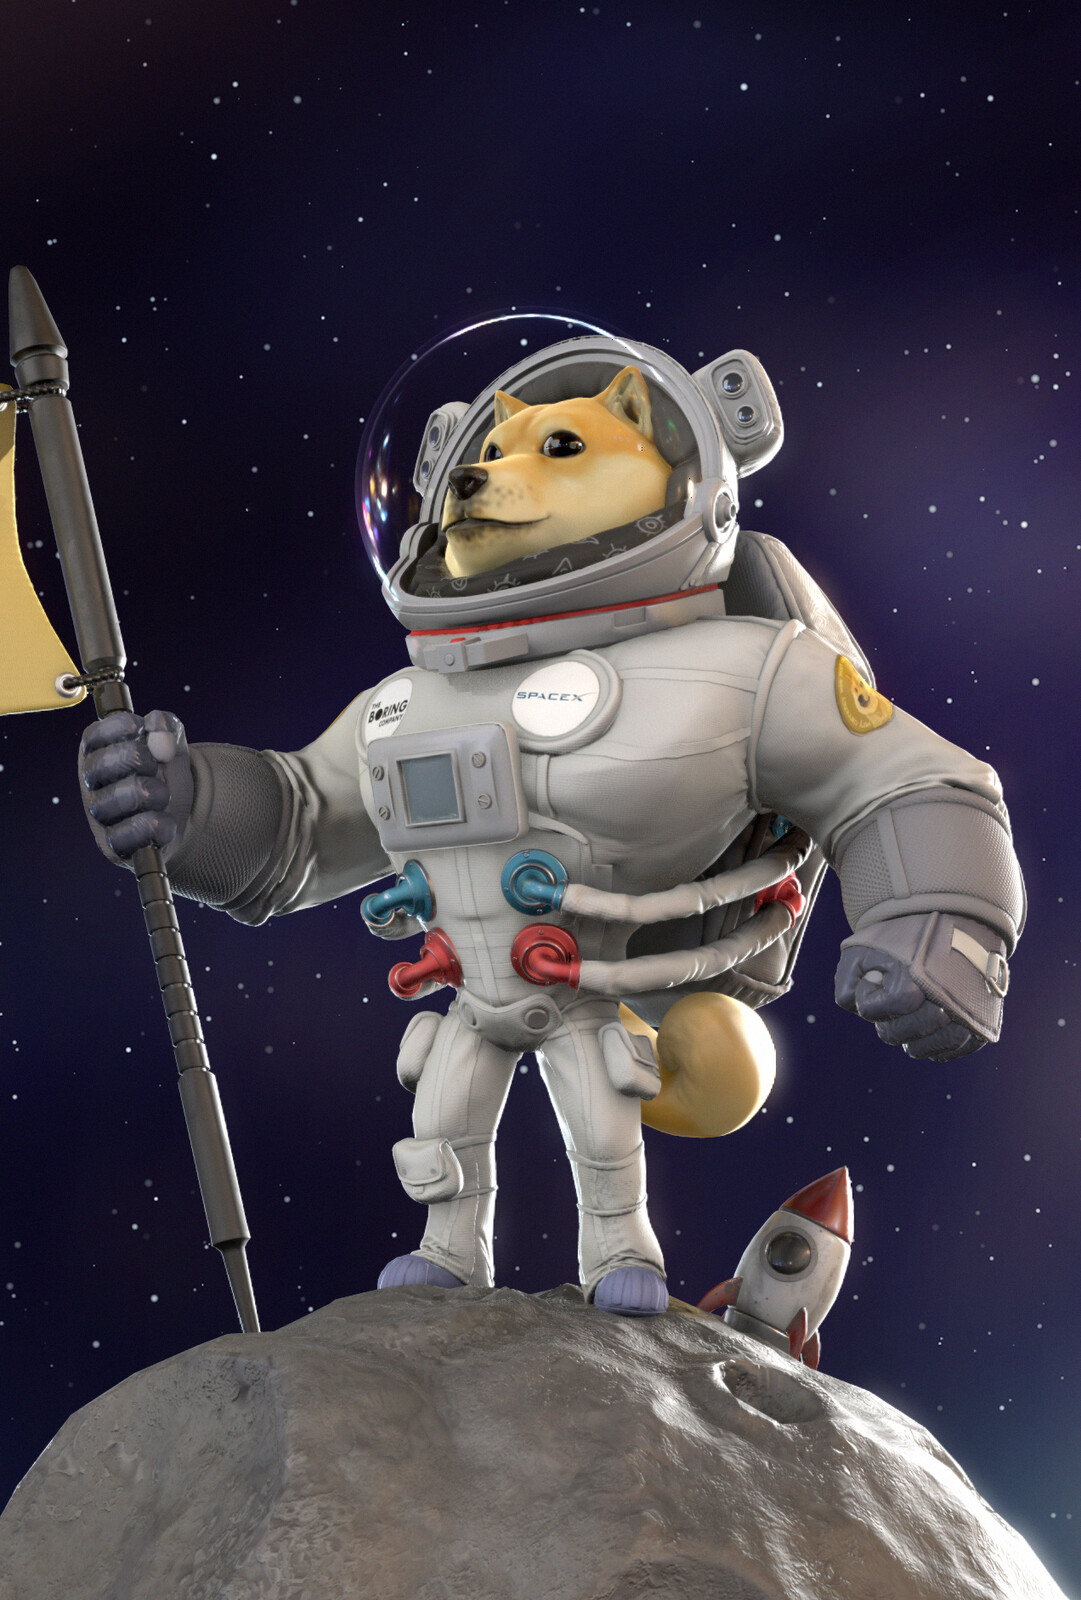 DOGE on the Moon | Model of the Doge Coin Shiba Dog Mascot